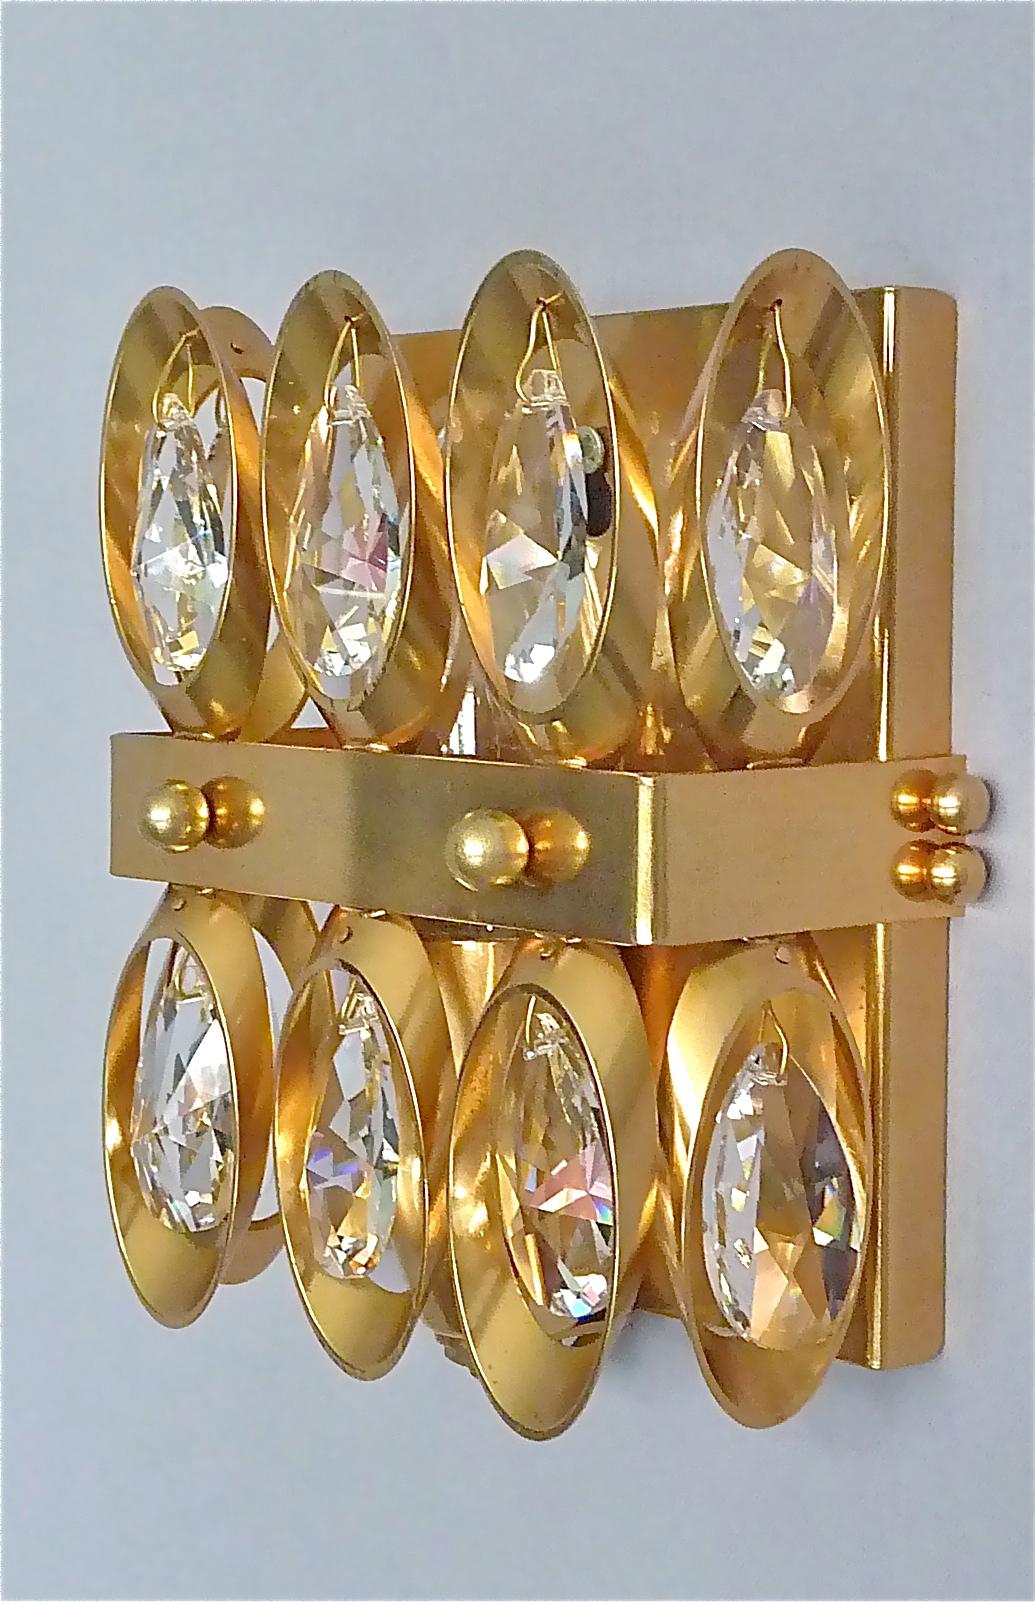 Midcentury Lobmeyr or Palwa Gilt Brass Faceted Crystal Glass Sconces 1960s, Pair For Sale 2